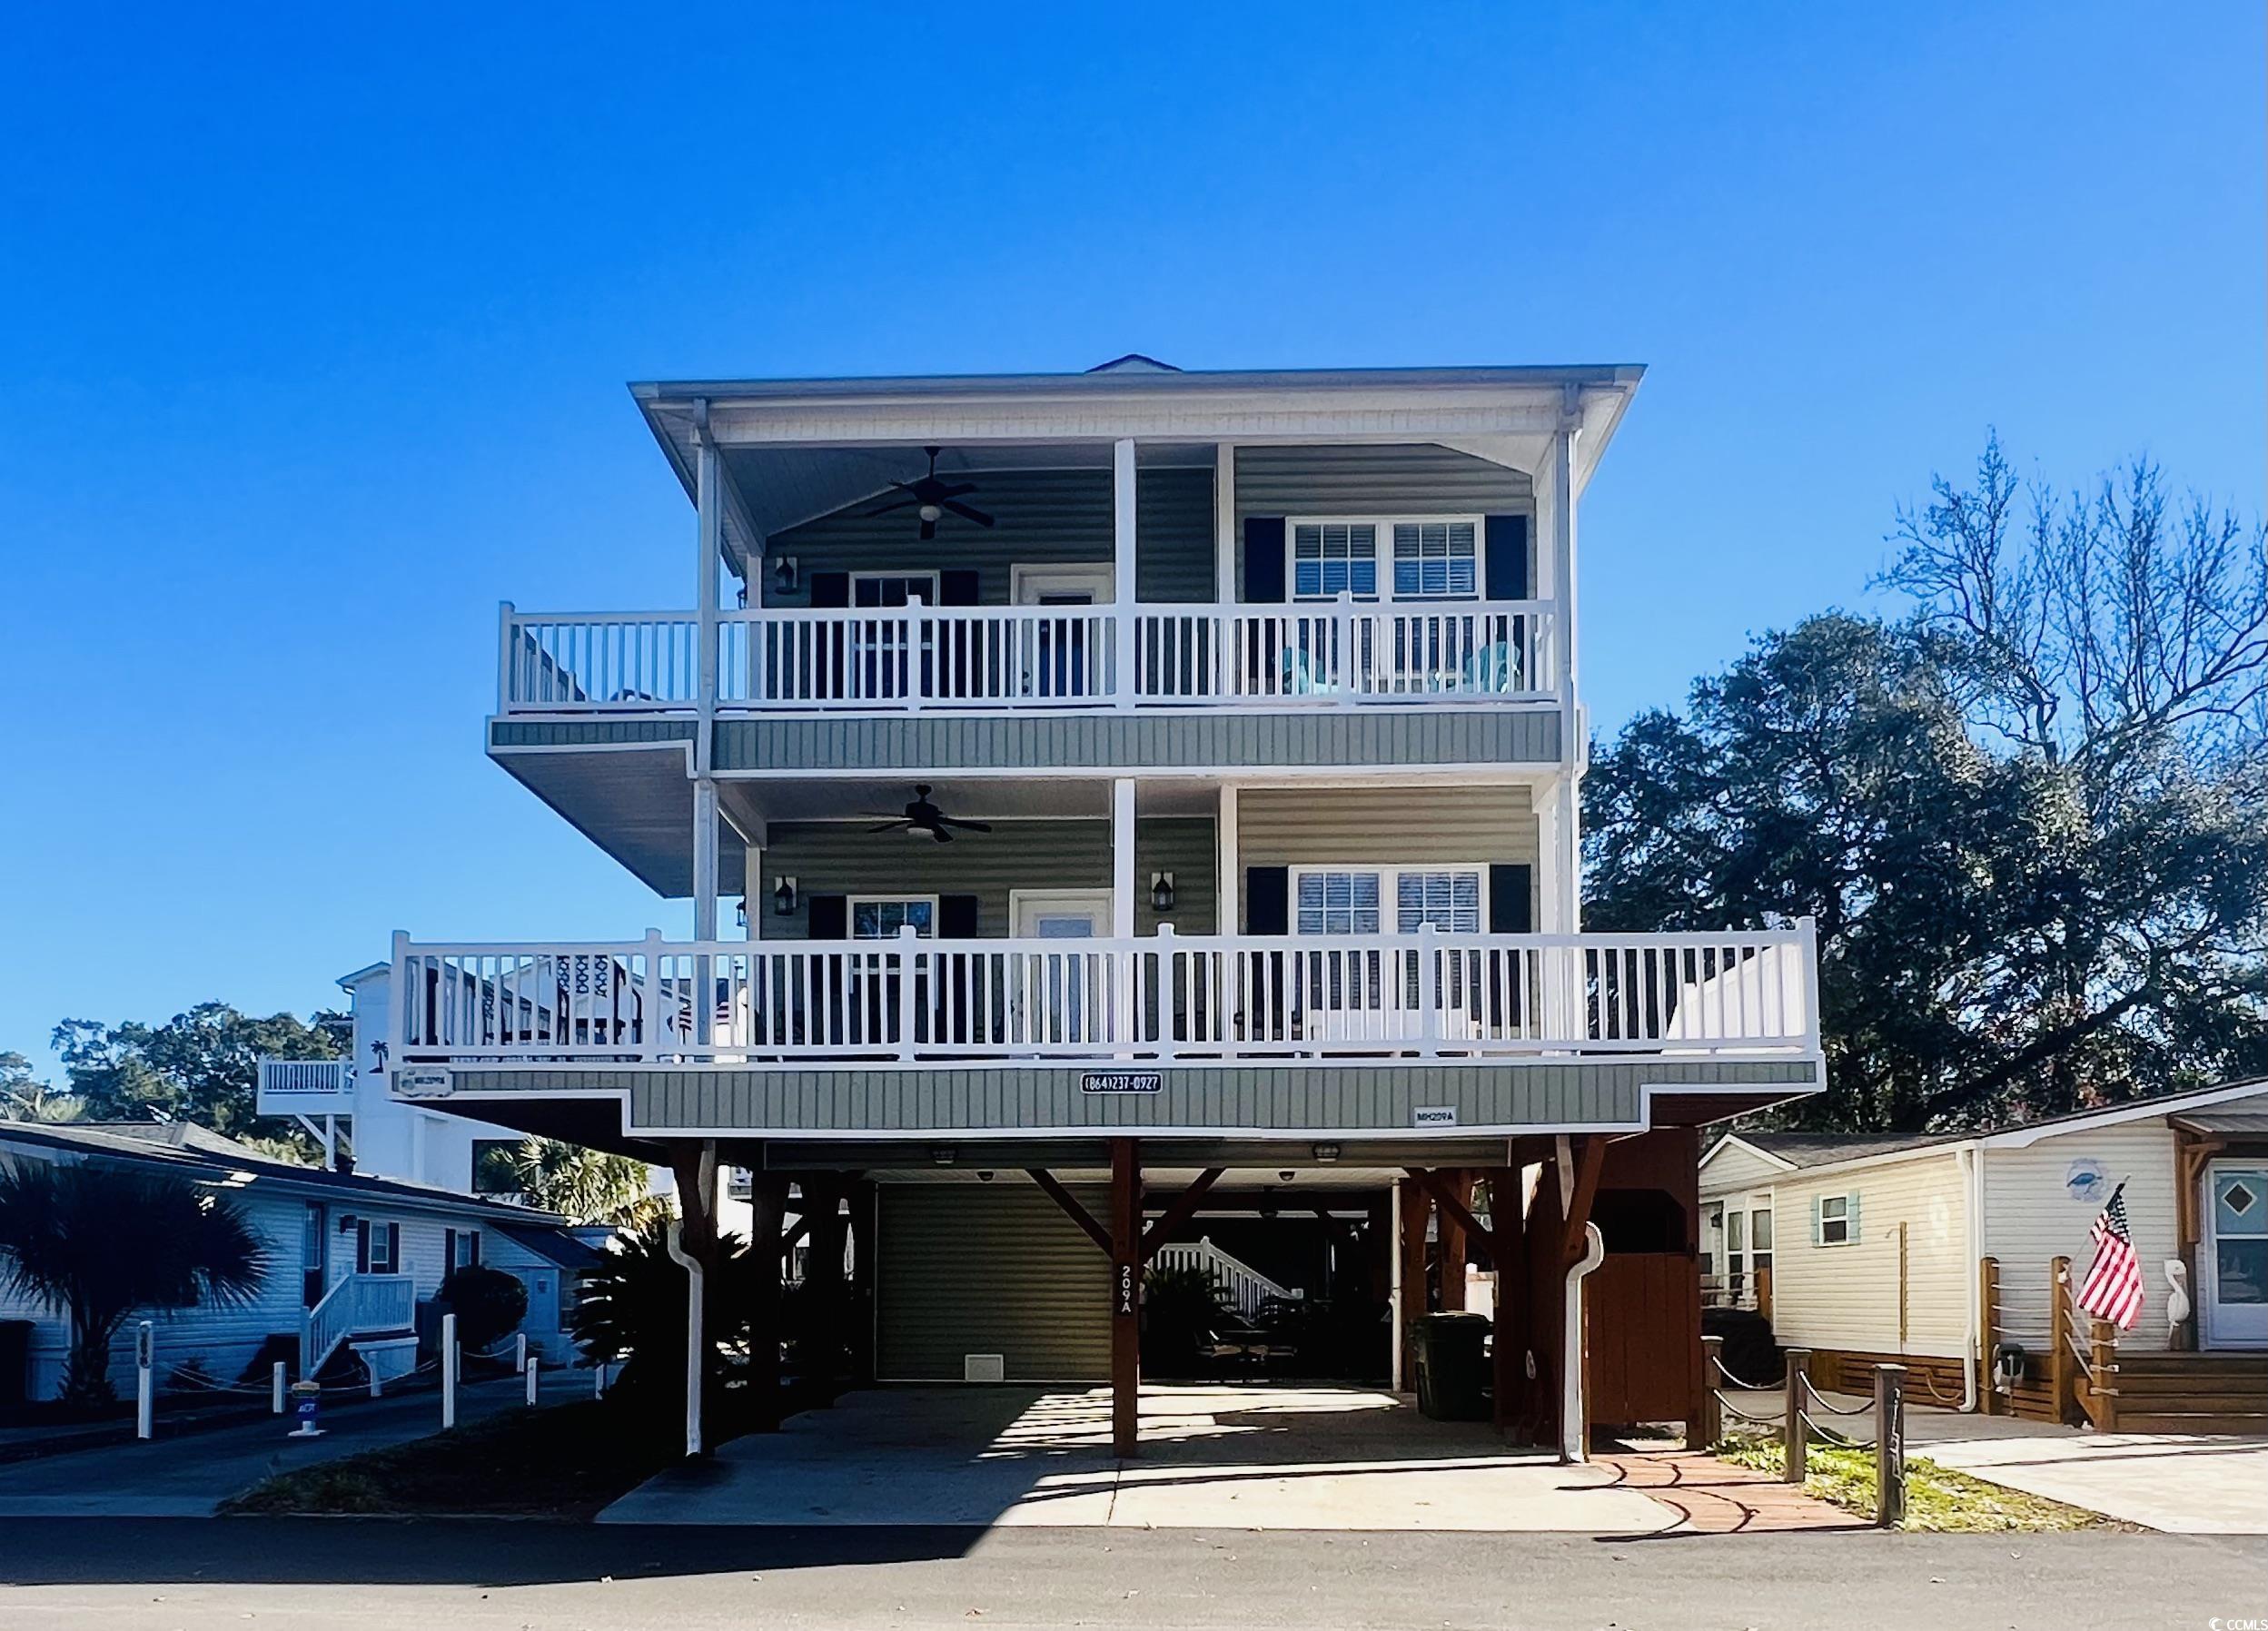 Photo of 6001 - MH209A S Kings Hwy. MH209A, Myrtle Beach, SC 29575